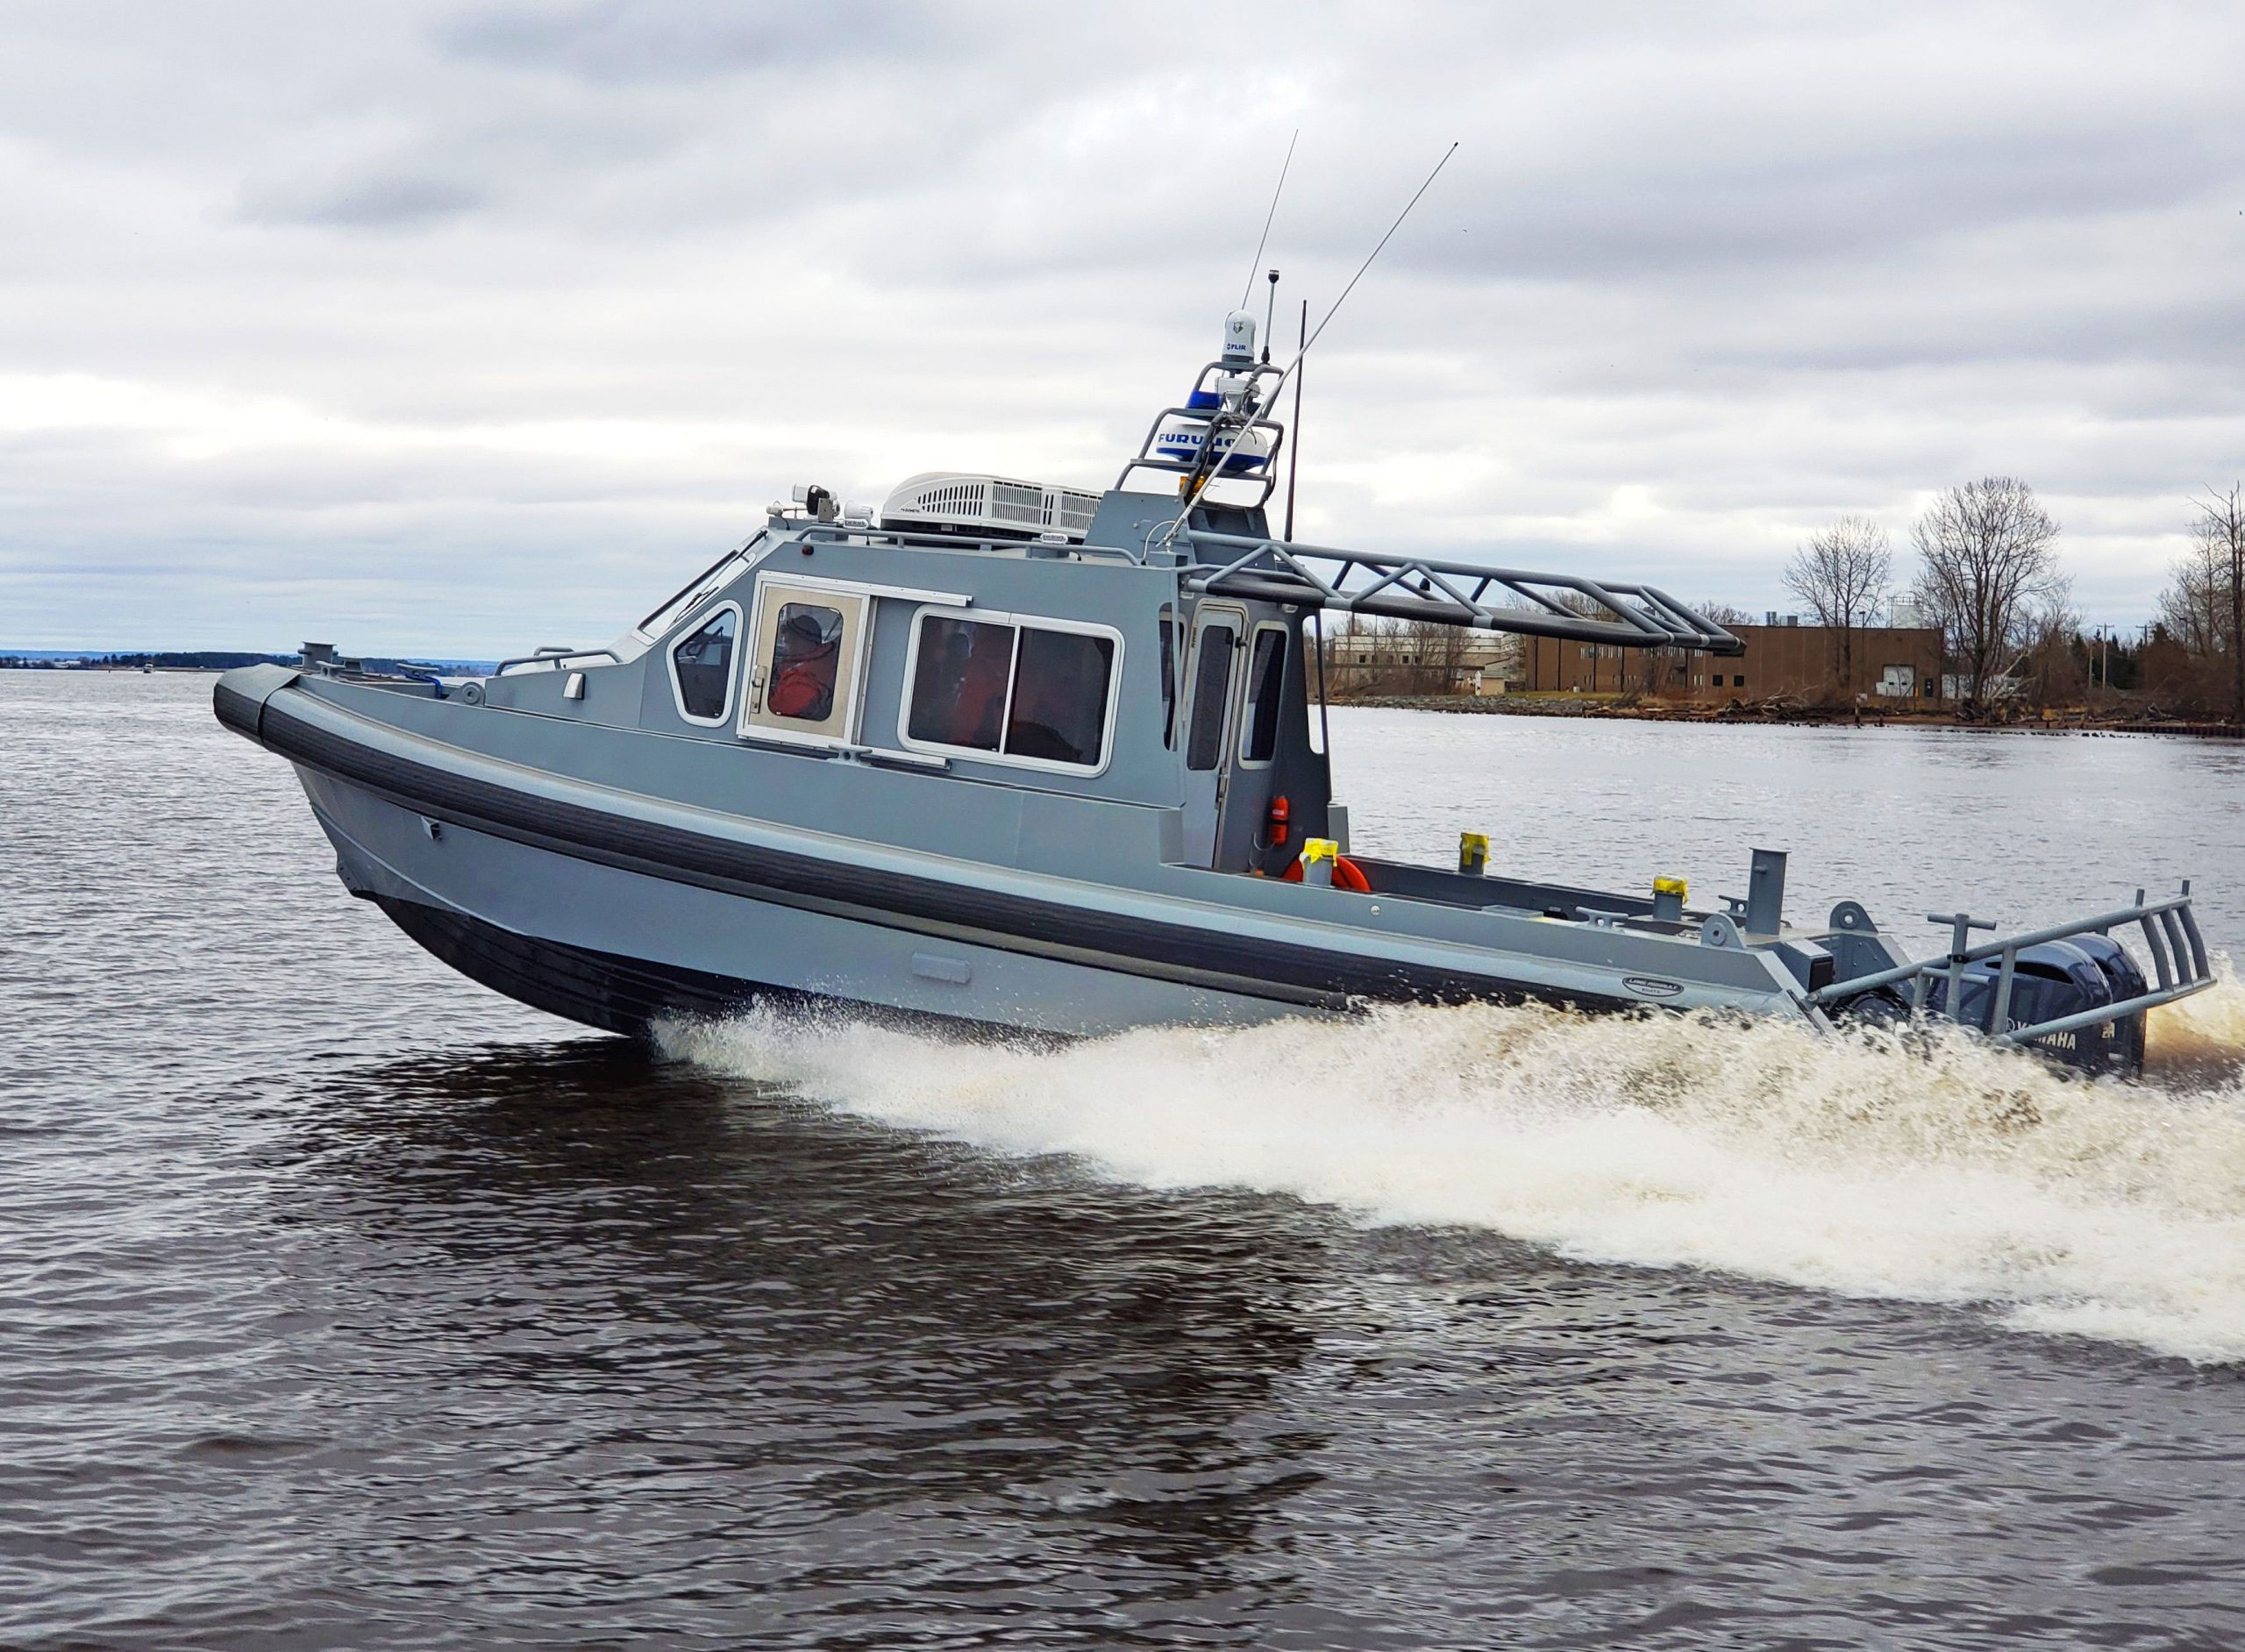 Lake Assault Boats has completed 15 FP-M patrol vessels for the U.S. Navy.